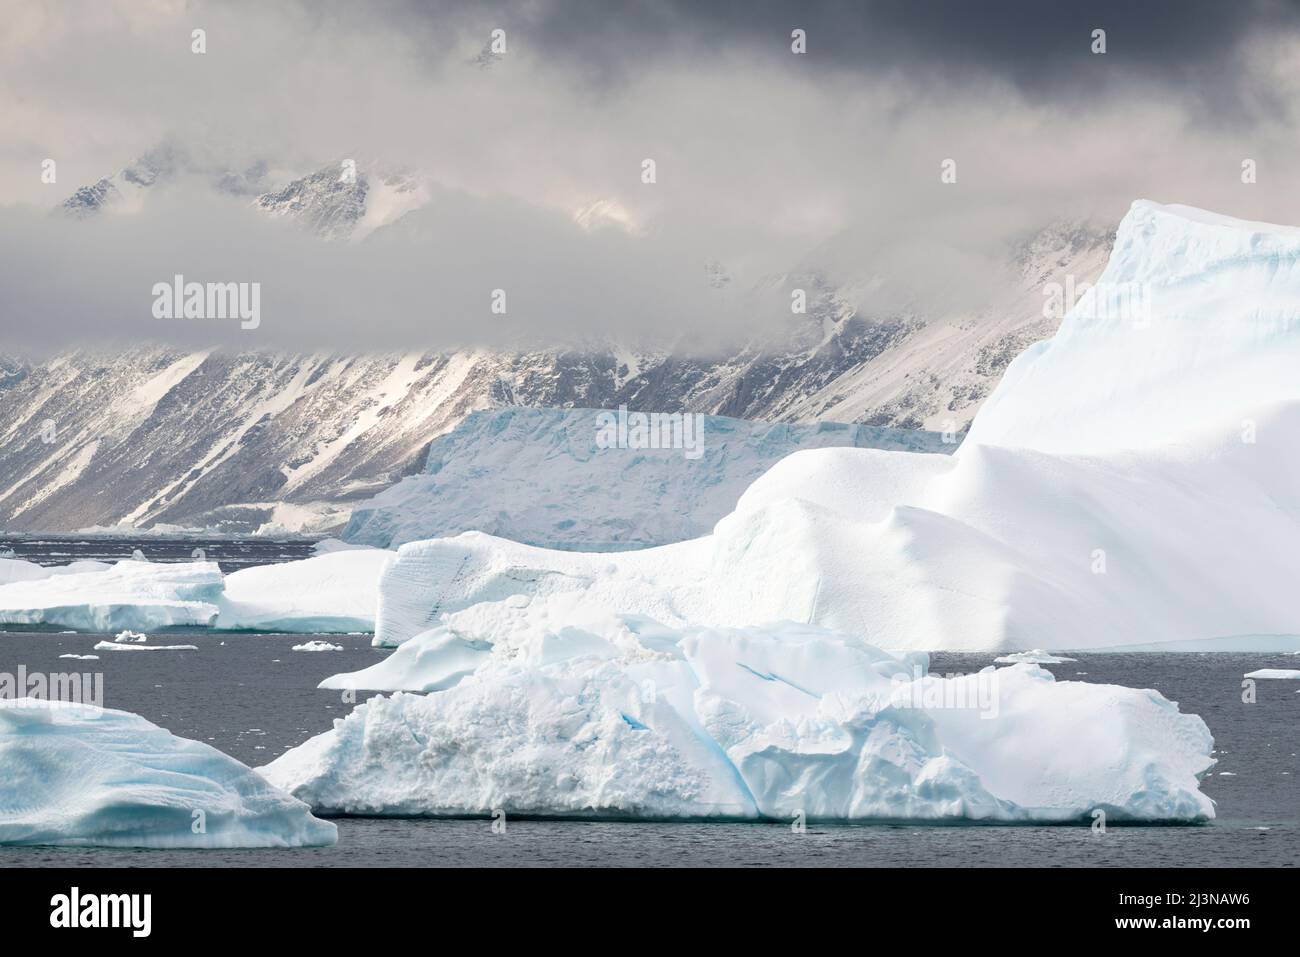 Afternoon light, icebergs with mountains in the background, Marguerite Bay, Antarctica, Stock Photo